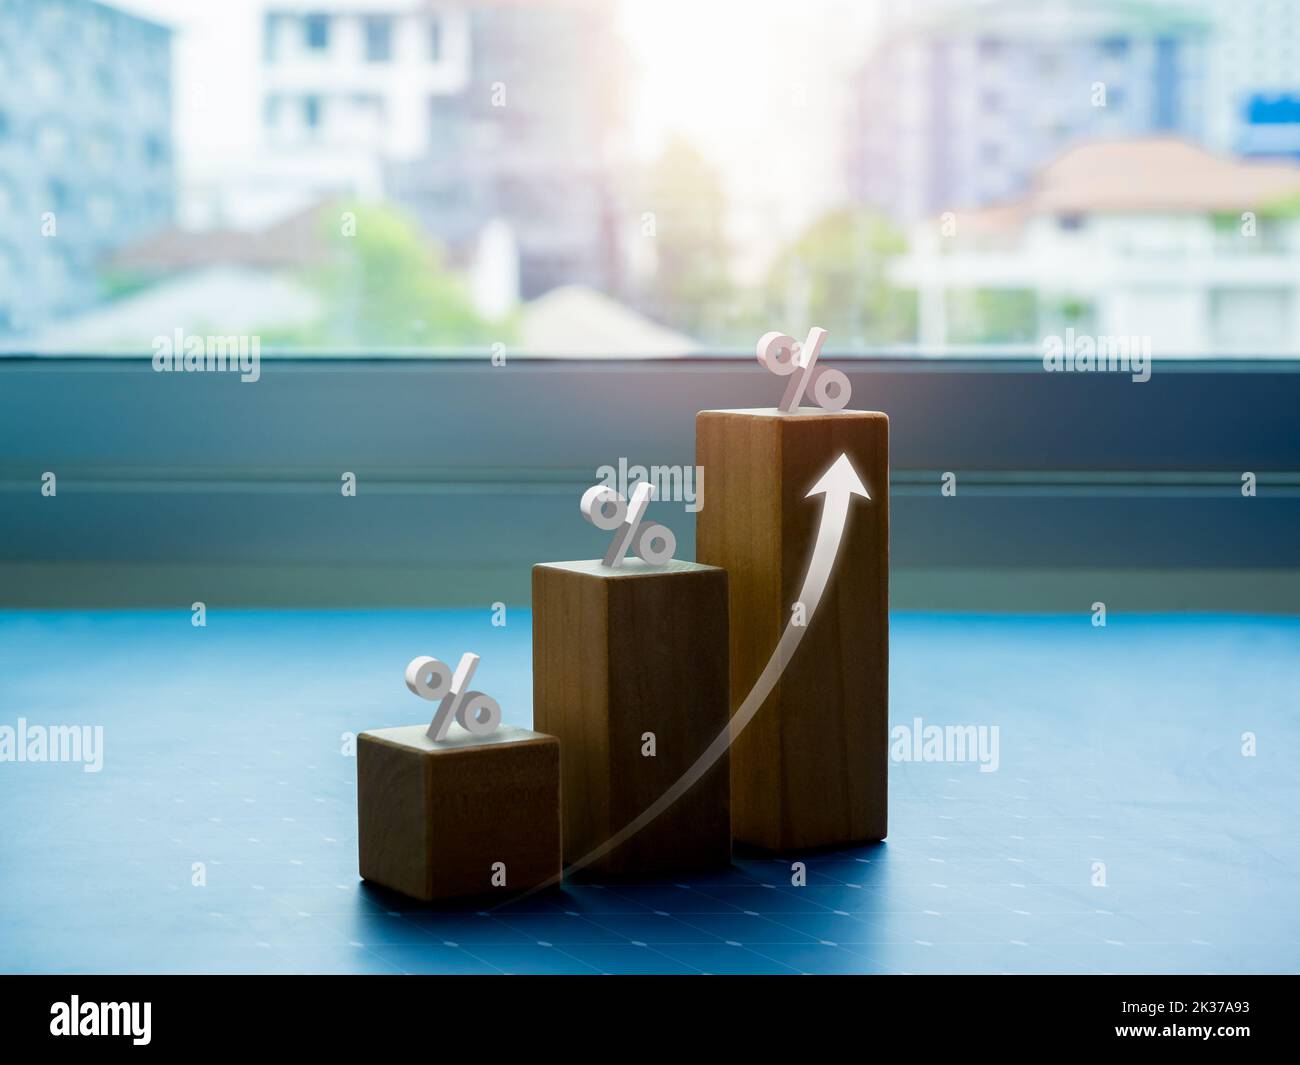 Shining rise up arrow on wooden cube blocks, bar graph chart steps with percentage 3d icons on city background, business growth process, profit, wealt Stock Photo